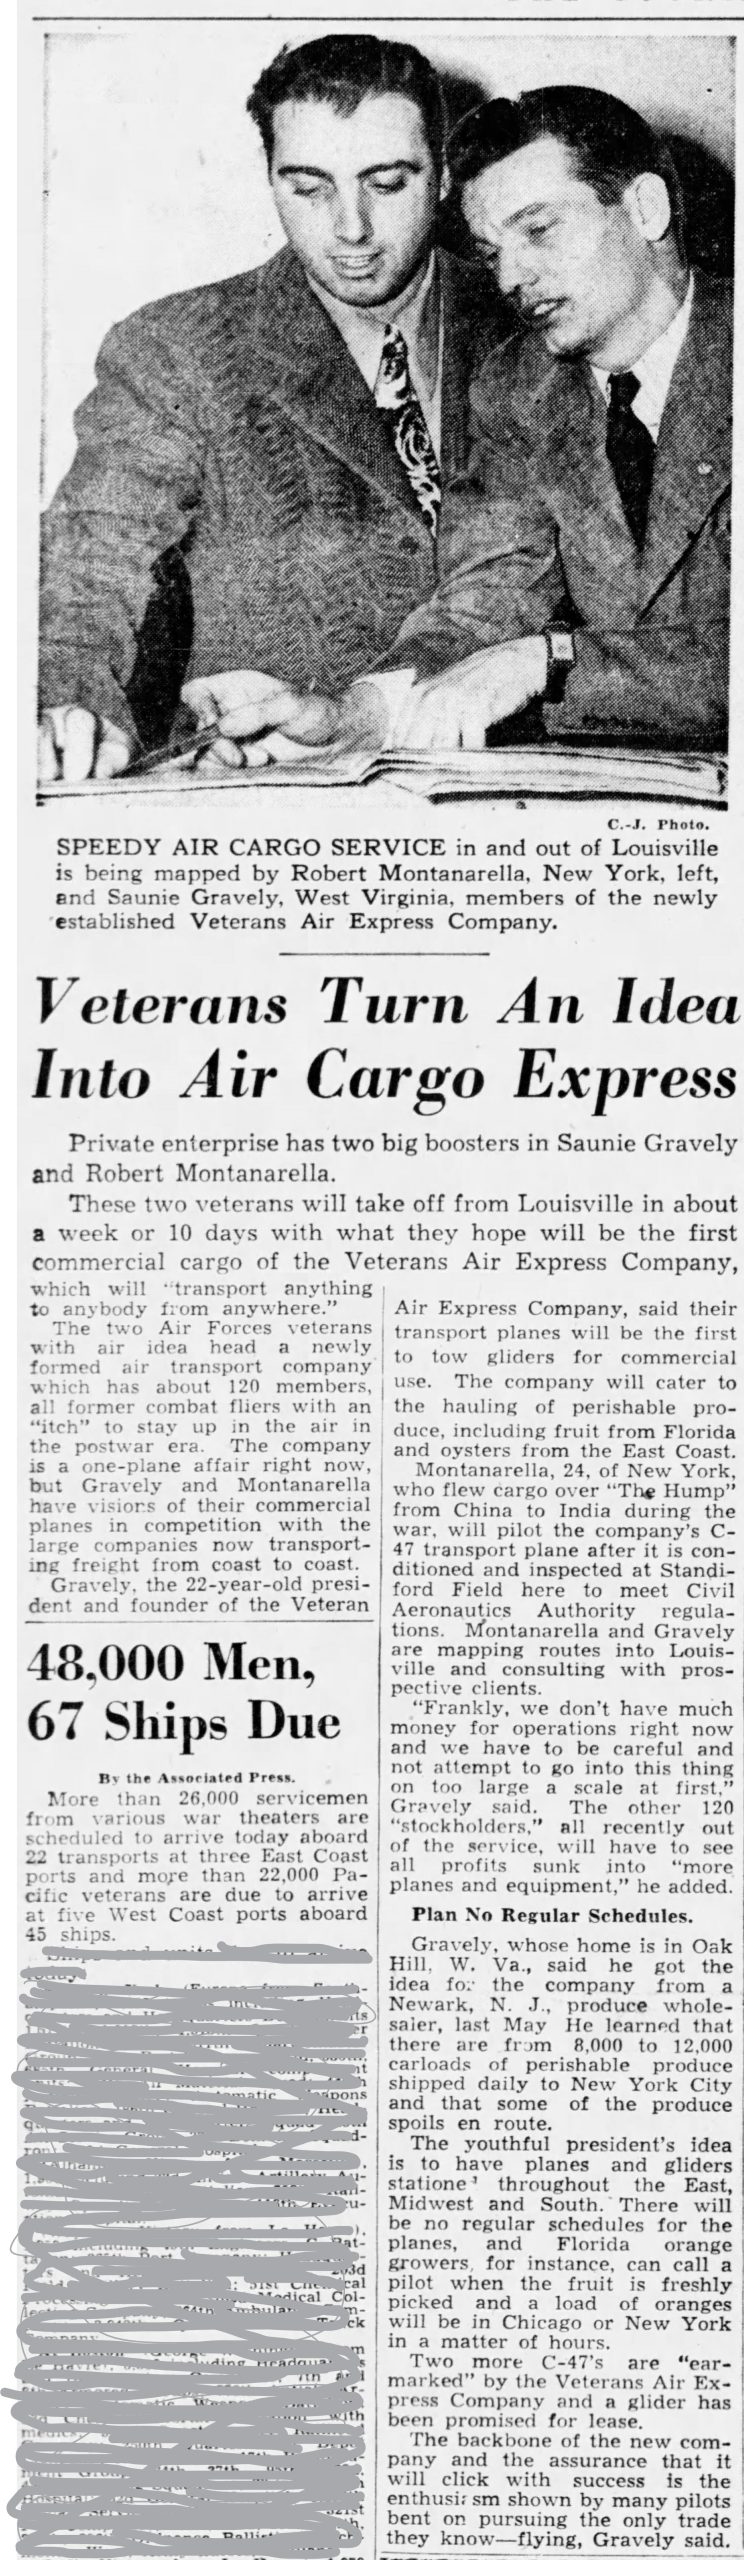 One of the earliest press stories after Veterans Air was formed, but before its first reveue cargo flight. Photo of Saunie Gravely, Founder, and Robert Montanarello, first-hire Veterans Air pilot.